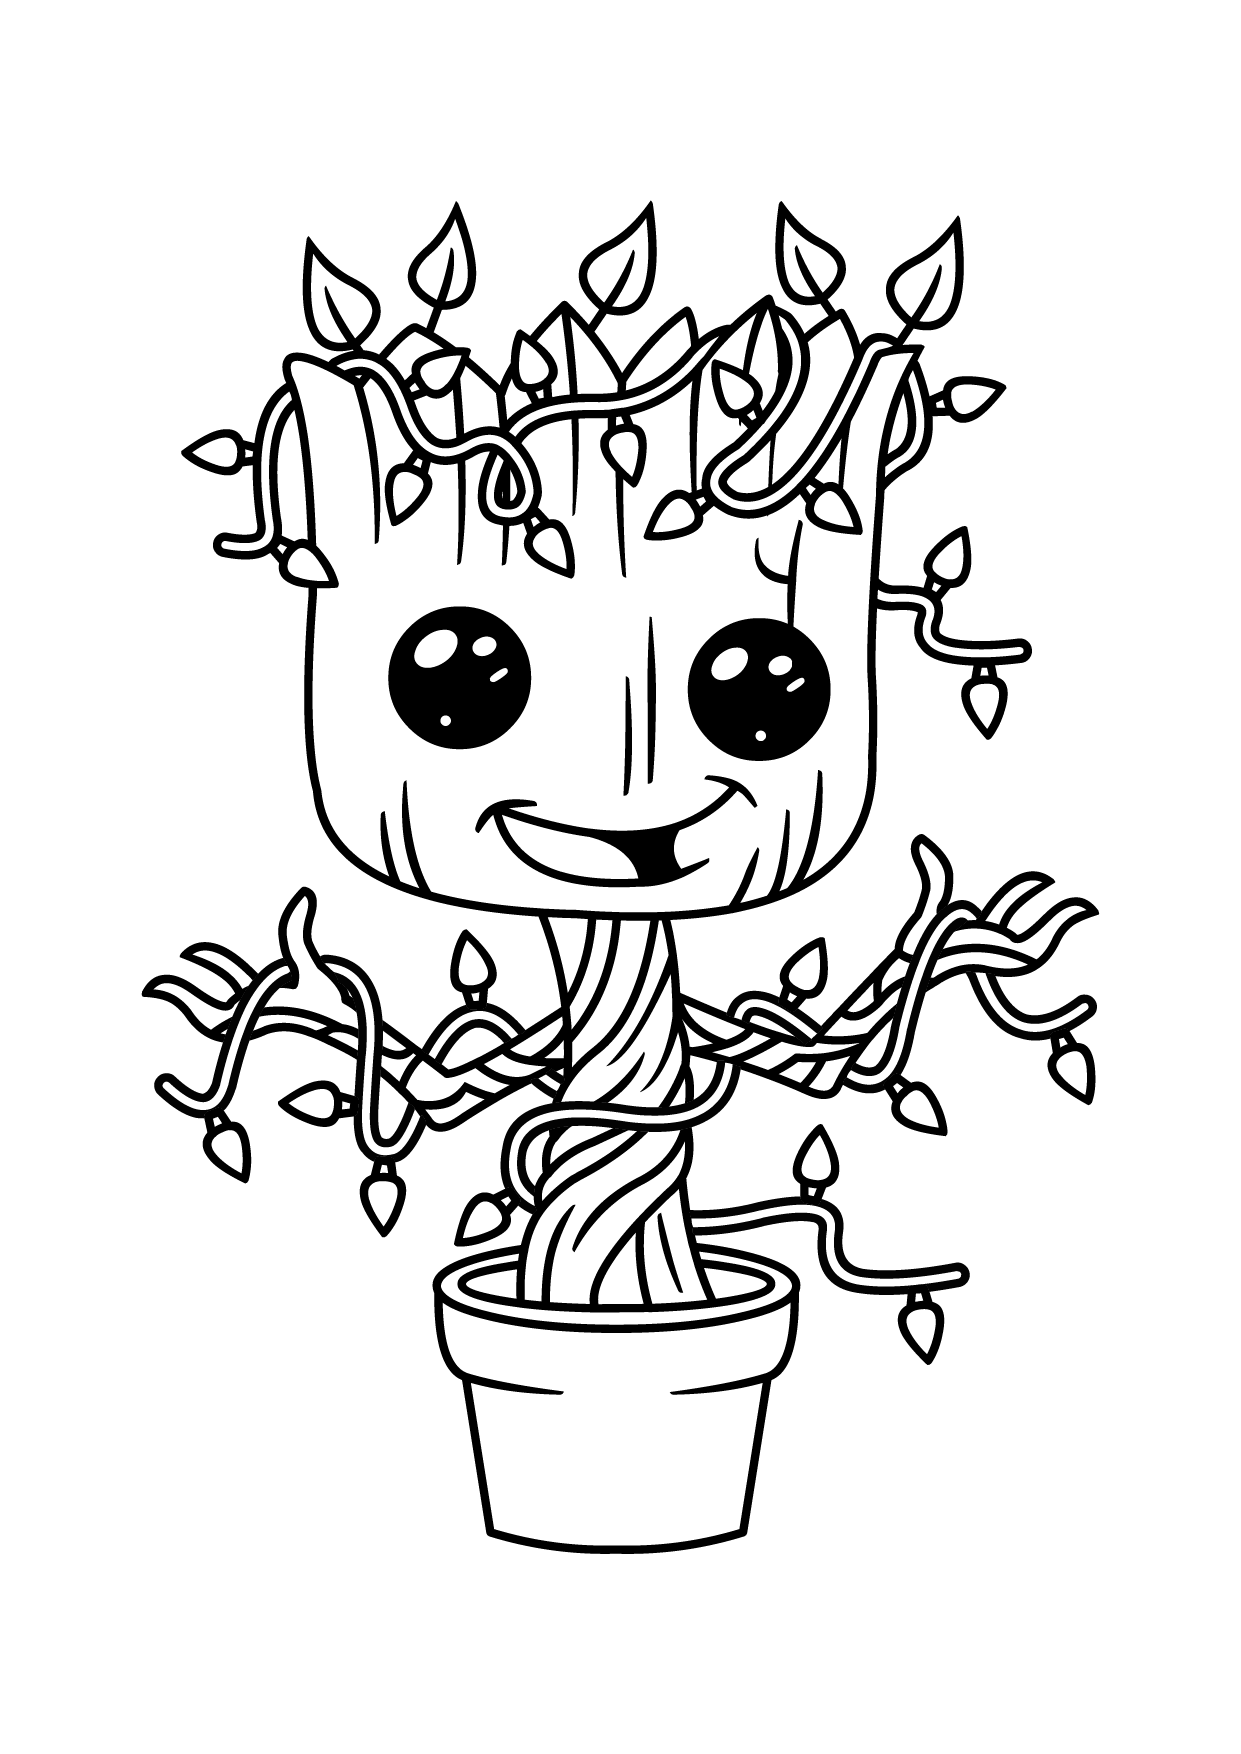 Small Groot In Flower Vase Coloring Page - Free Printable Coloring